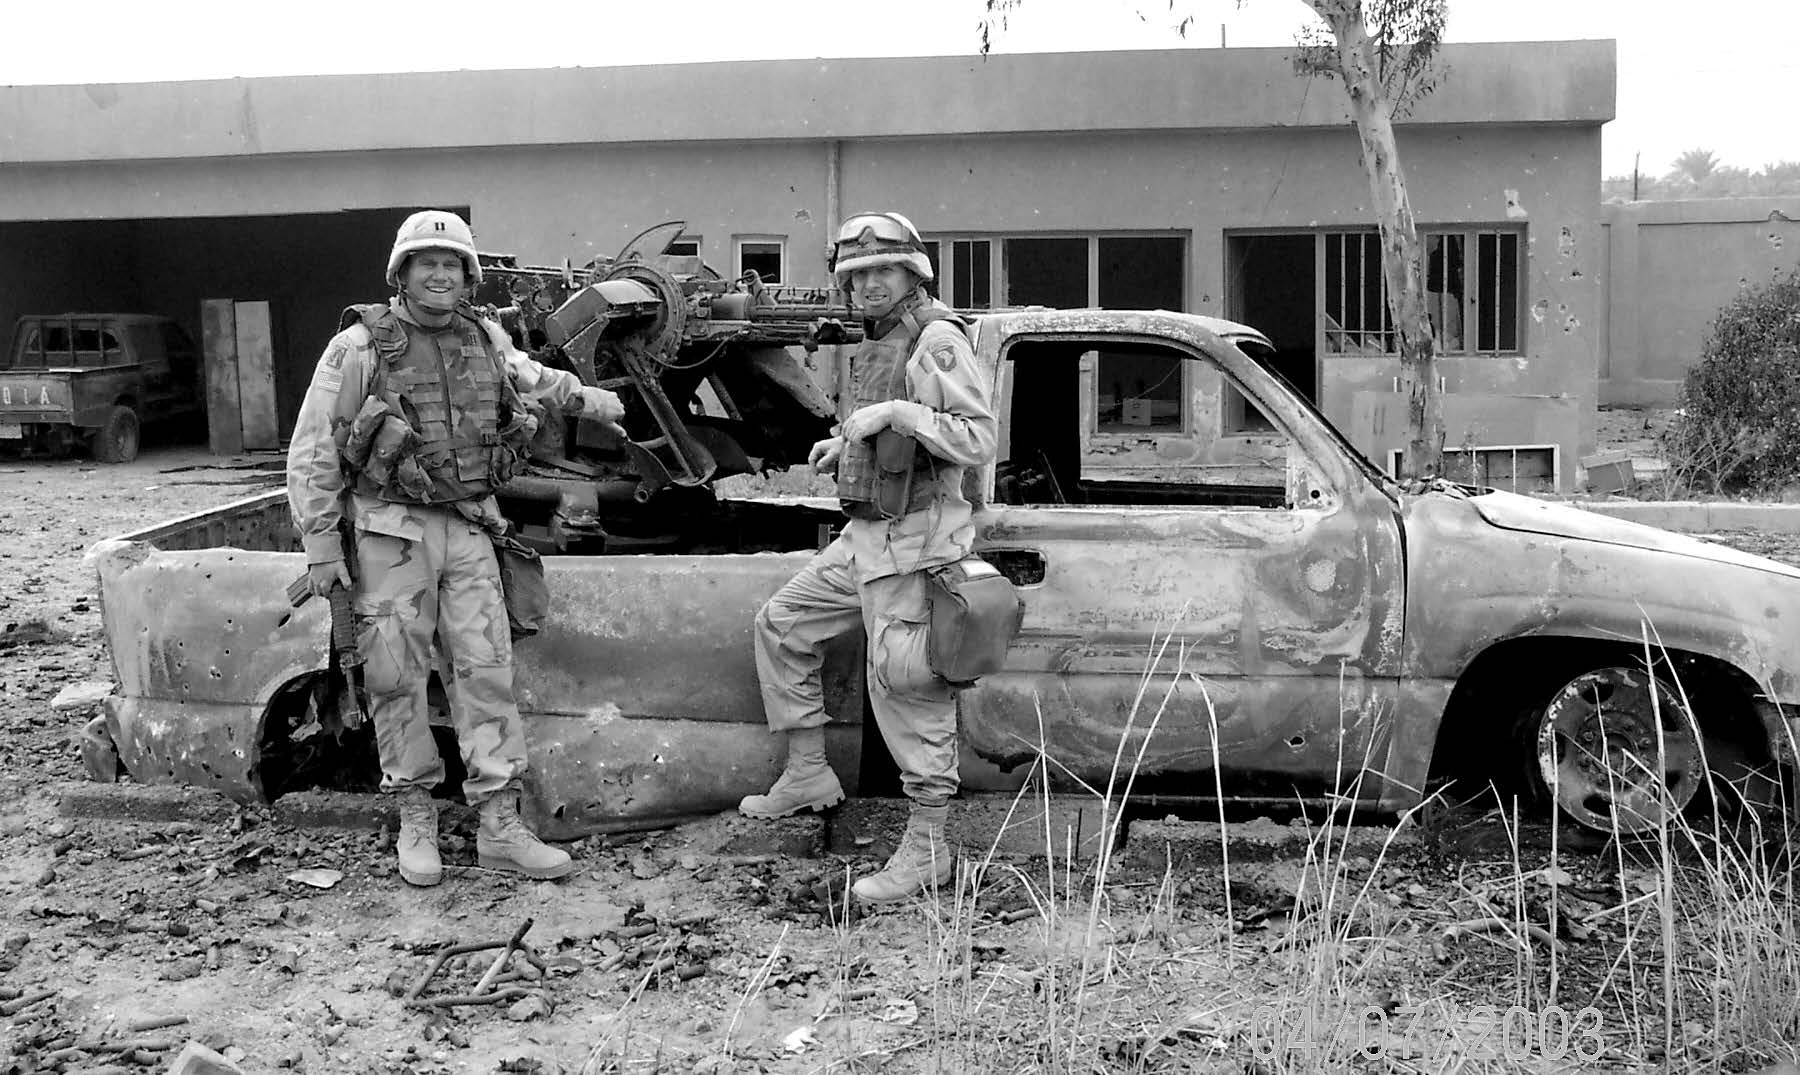 Colonel Richard Hatch (right) is pictured with one of his subordinates in front of a damaged Iraqi vehicle. Courtesy of Richard O. Hatch.